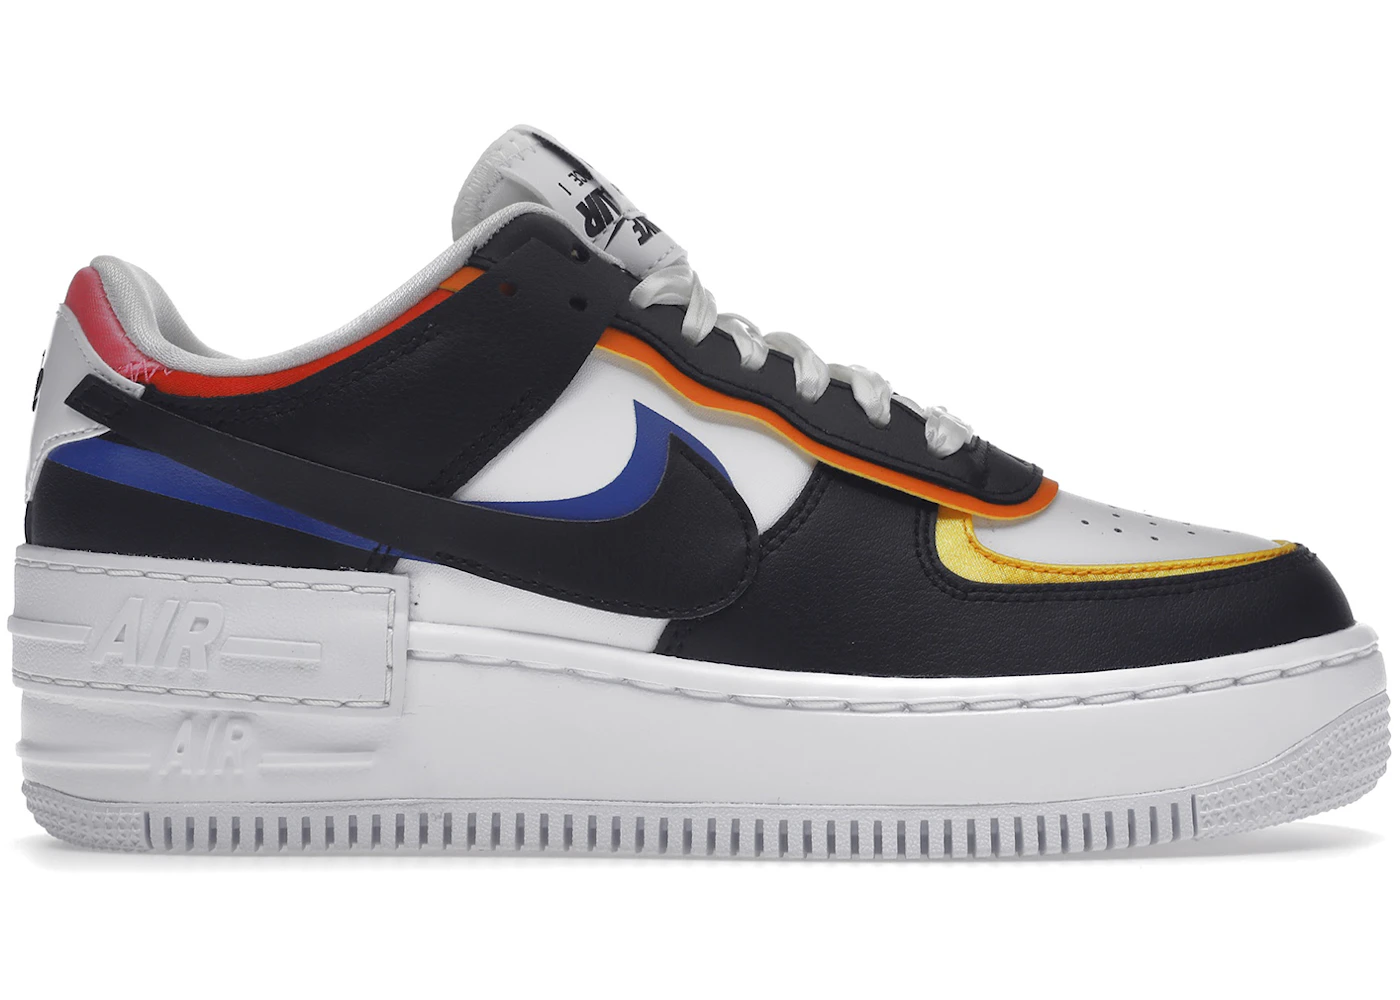 Nike Air Force 1 Low Shadow Black Multi-Color (Women's) - DC4462-100 - US